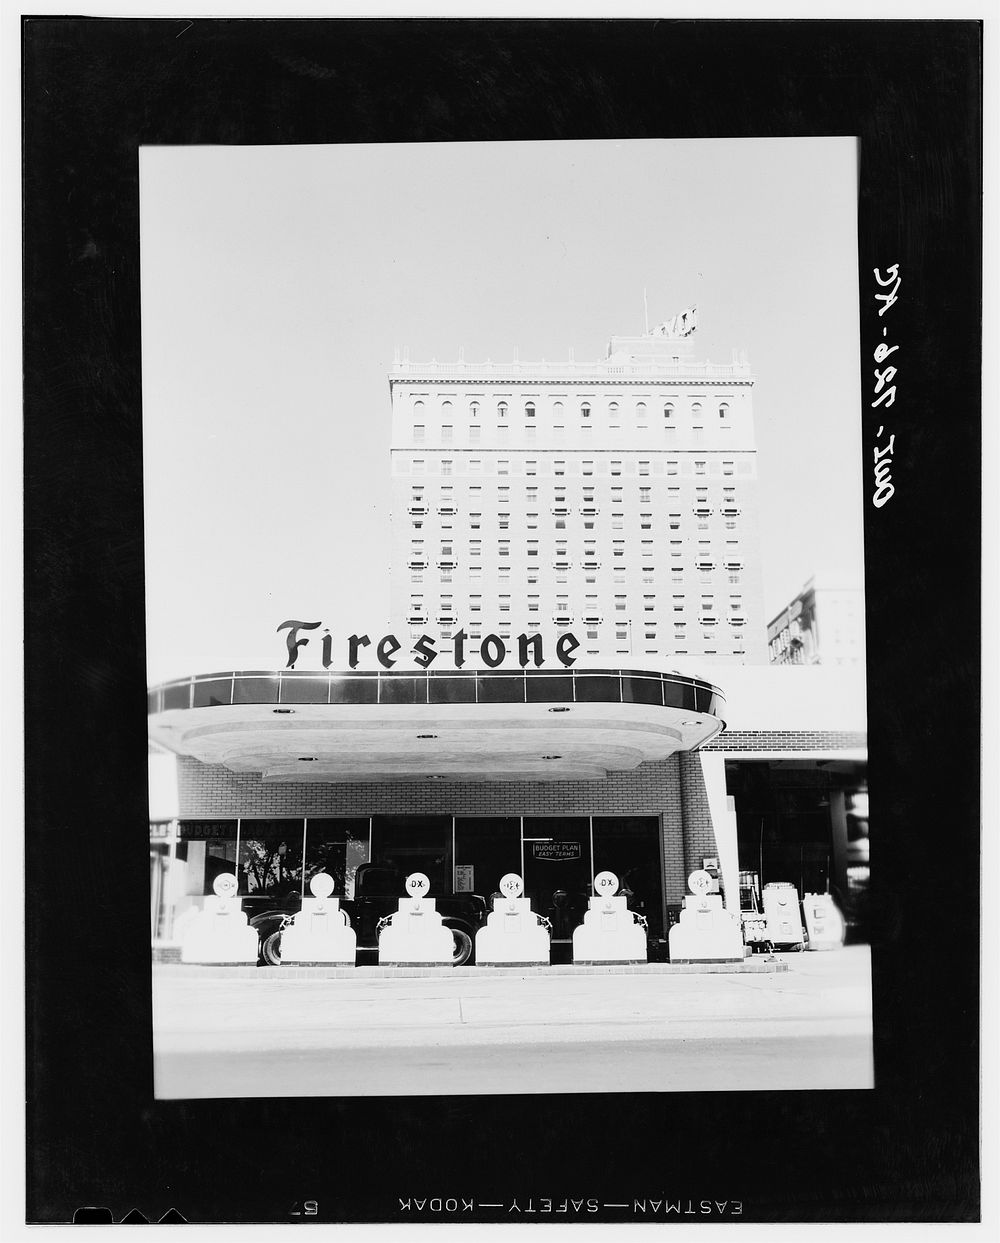 Tulsa, Oklahoma. Filling station. Sourced from the Library of Congress.